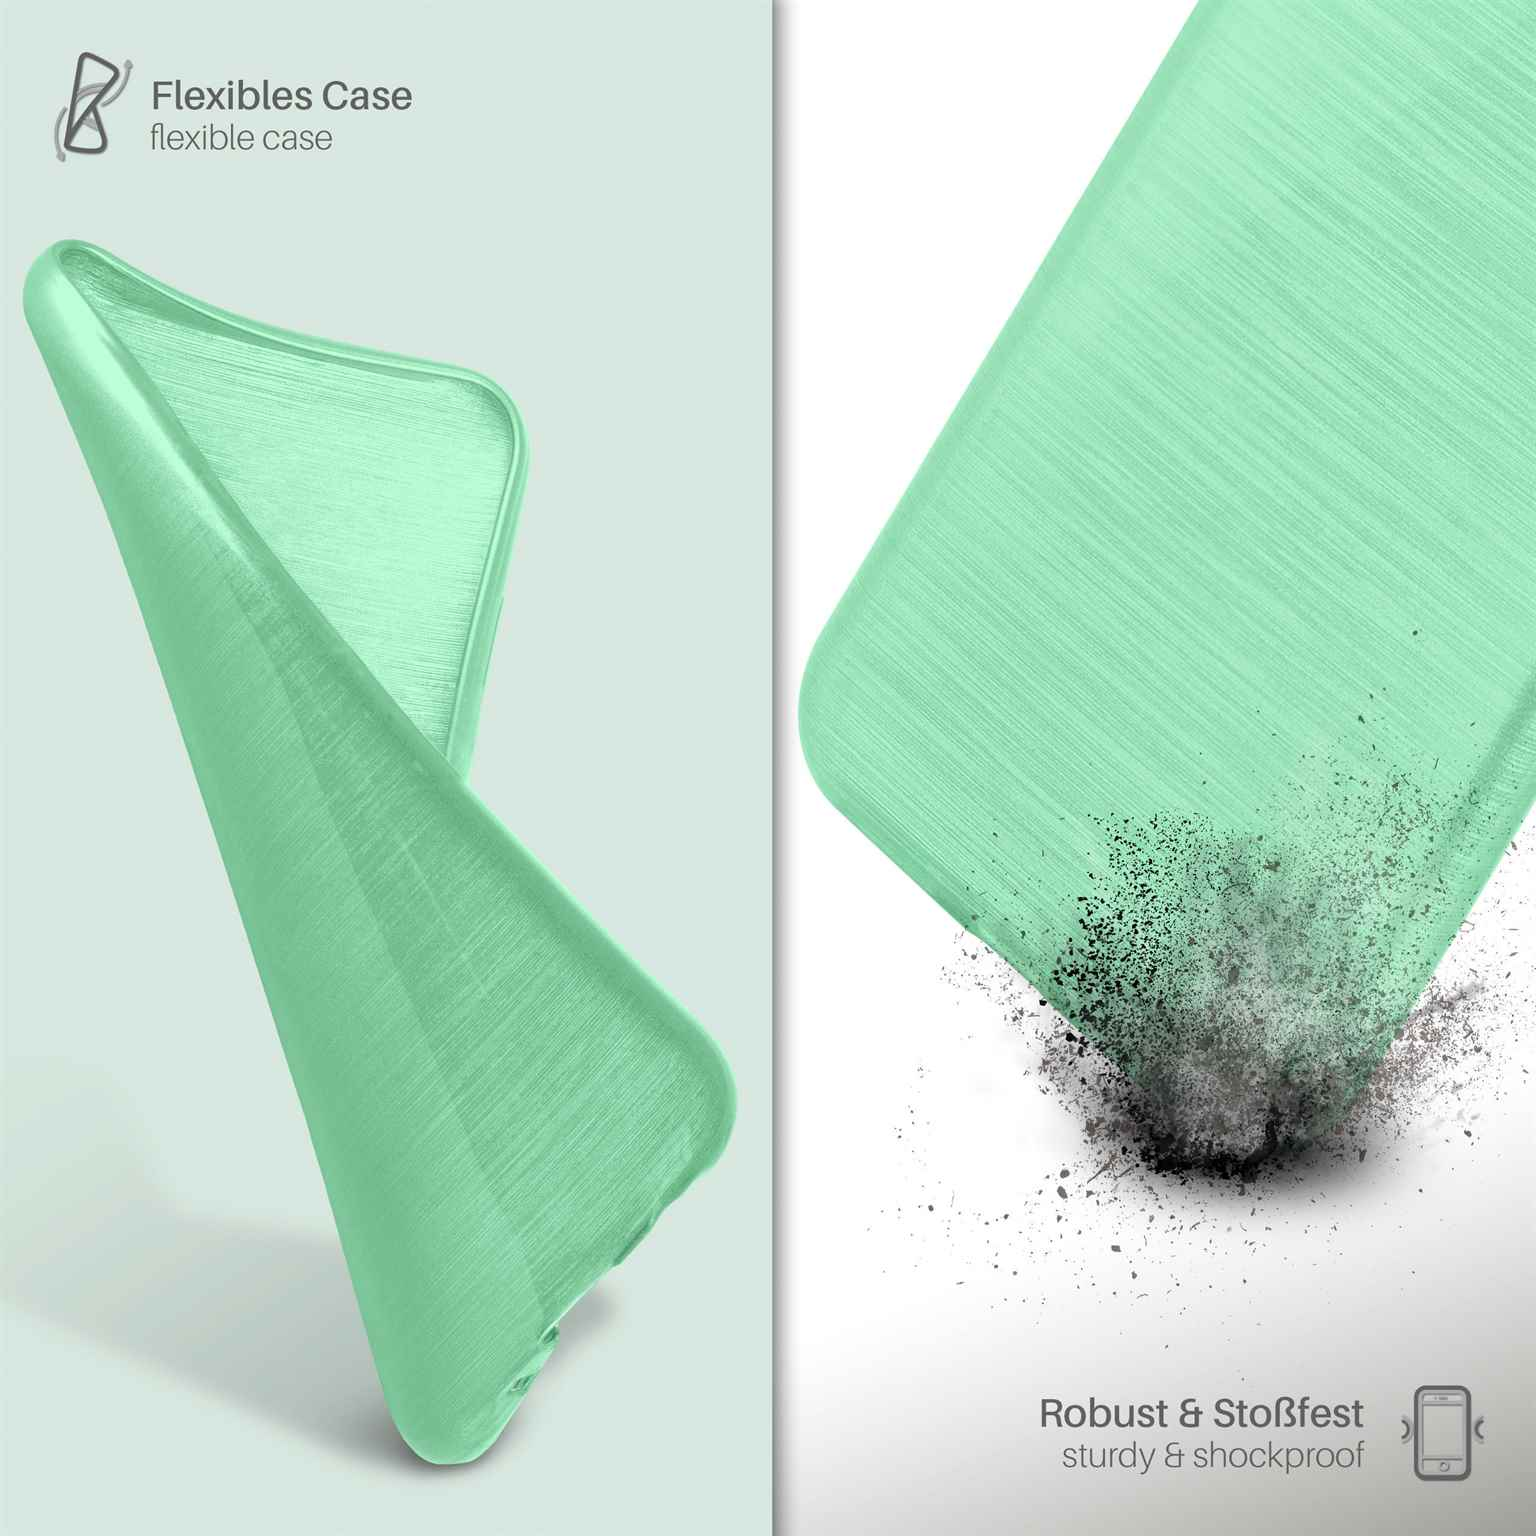 MOEX Brushed Case, Backcover, Mint-Green Generation 2. iPhone (2020), Apple, SE